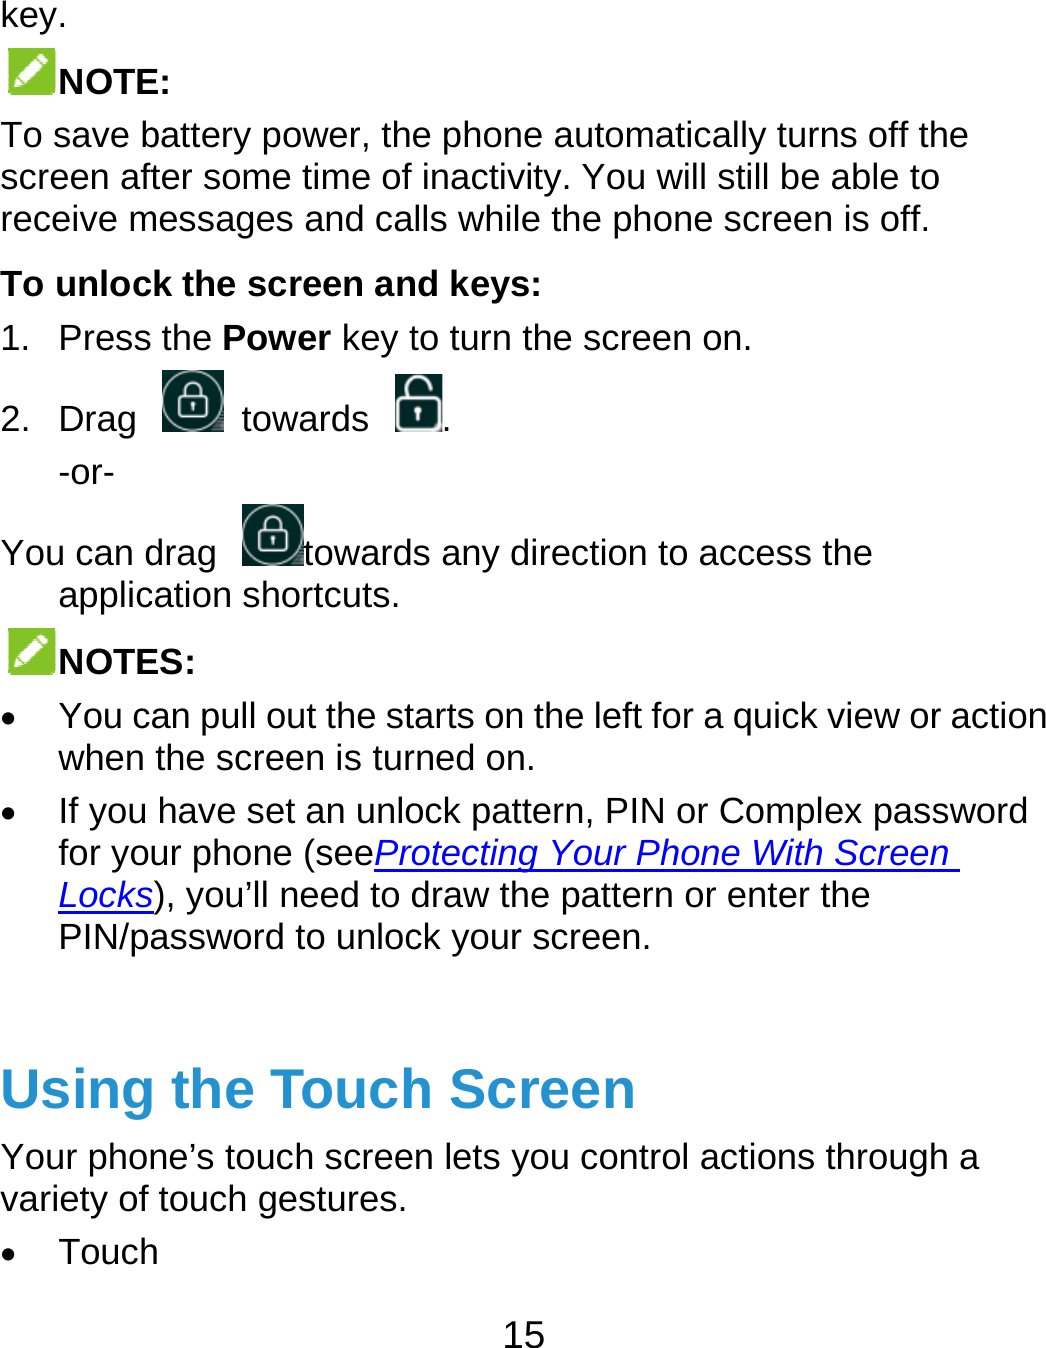  key. NOTETo save bscreen aftreceive mTo unloc1. Press2. Drag -or- You can dapplicNOTE You cwhen  If you for yoLocksPIN/pa UsingYour phonvariety of  TouchE:  battery power, thfter some time of messages and cak the screen an the Power key t towards drag towardcation shortcuts. ES:  an pull out the stthe screen is turhave set an unlour phone (seePros), you’ll need to dassword to unlocg the Touchne’s touch screetouch gestures.h 15 e phone automafinactivity. You wlls while the phond keys: to turn the scree. s any direction to tarts on the left forned on. ock pattern, PIN rotecting Your Phdraw the patternck your screen.h Screenn lets you controtically turns off thwill still be able tone screen is off.n on. o access the or a quick view oror Complex passhone With Screen or enter the ol actions throughhe o r action sword n h a 